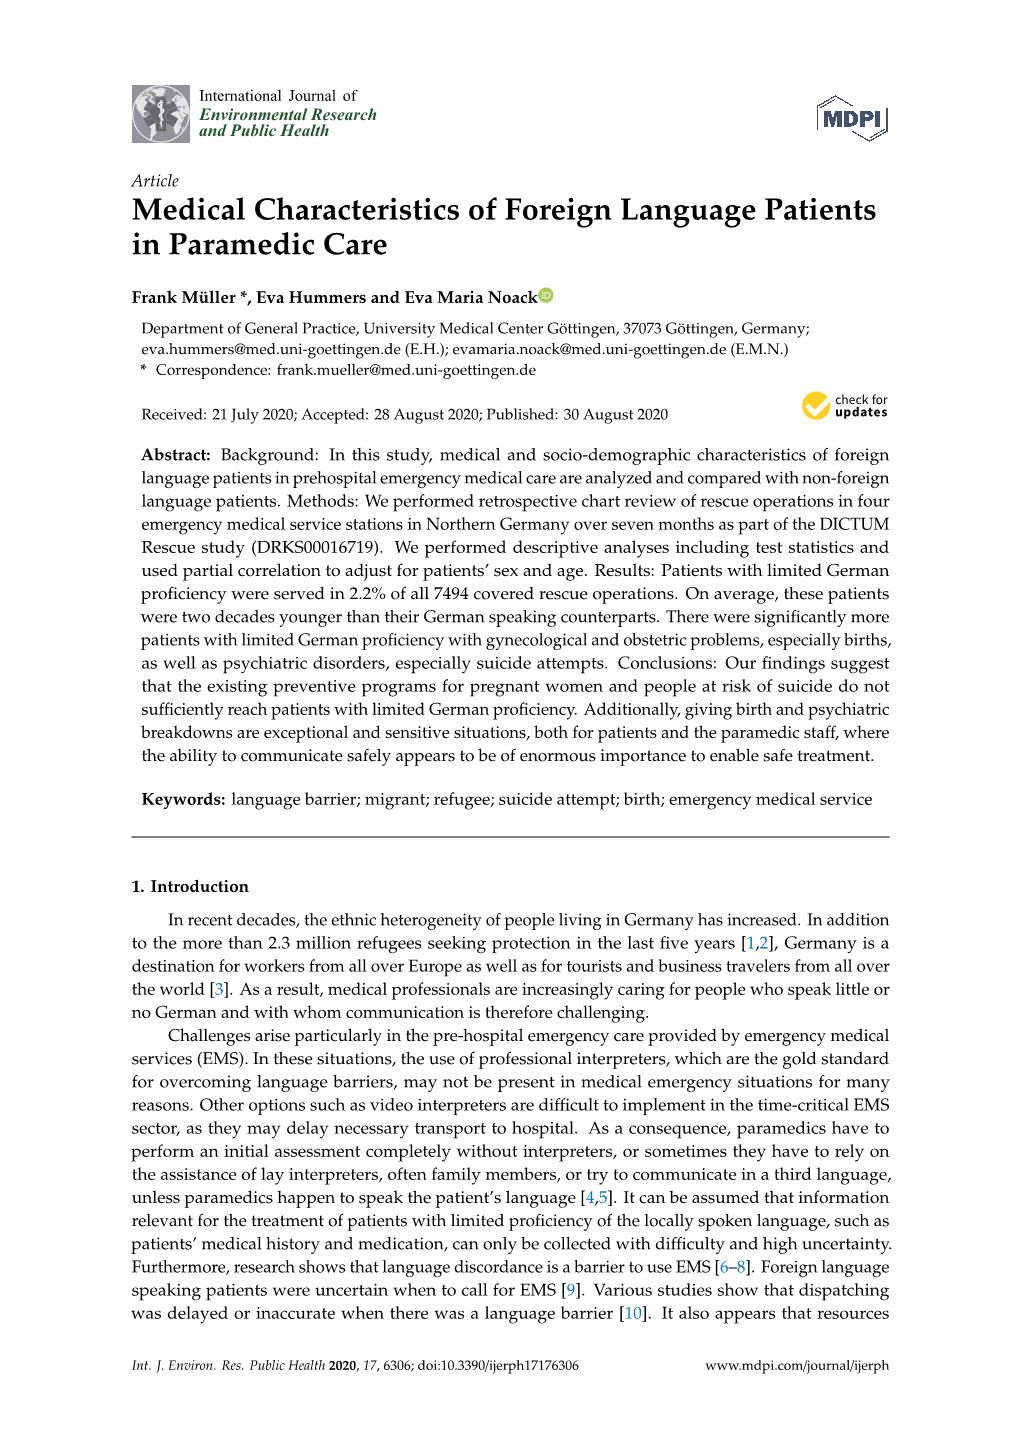 Medical Characteristics of Foreign Language Patients in Paramedic Care